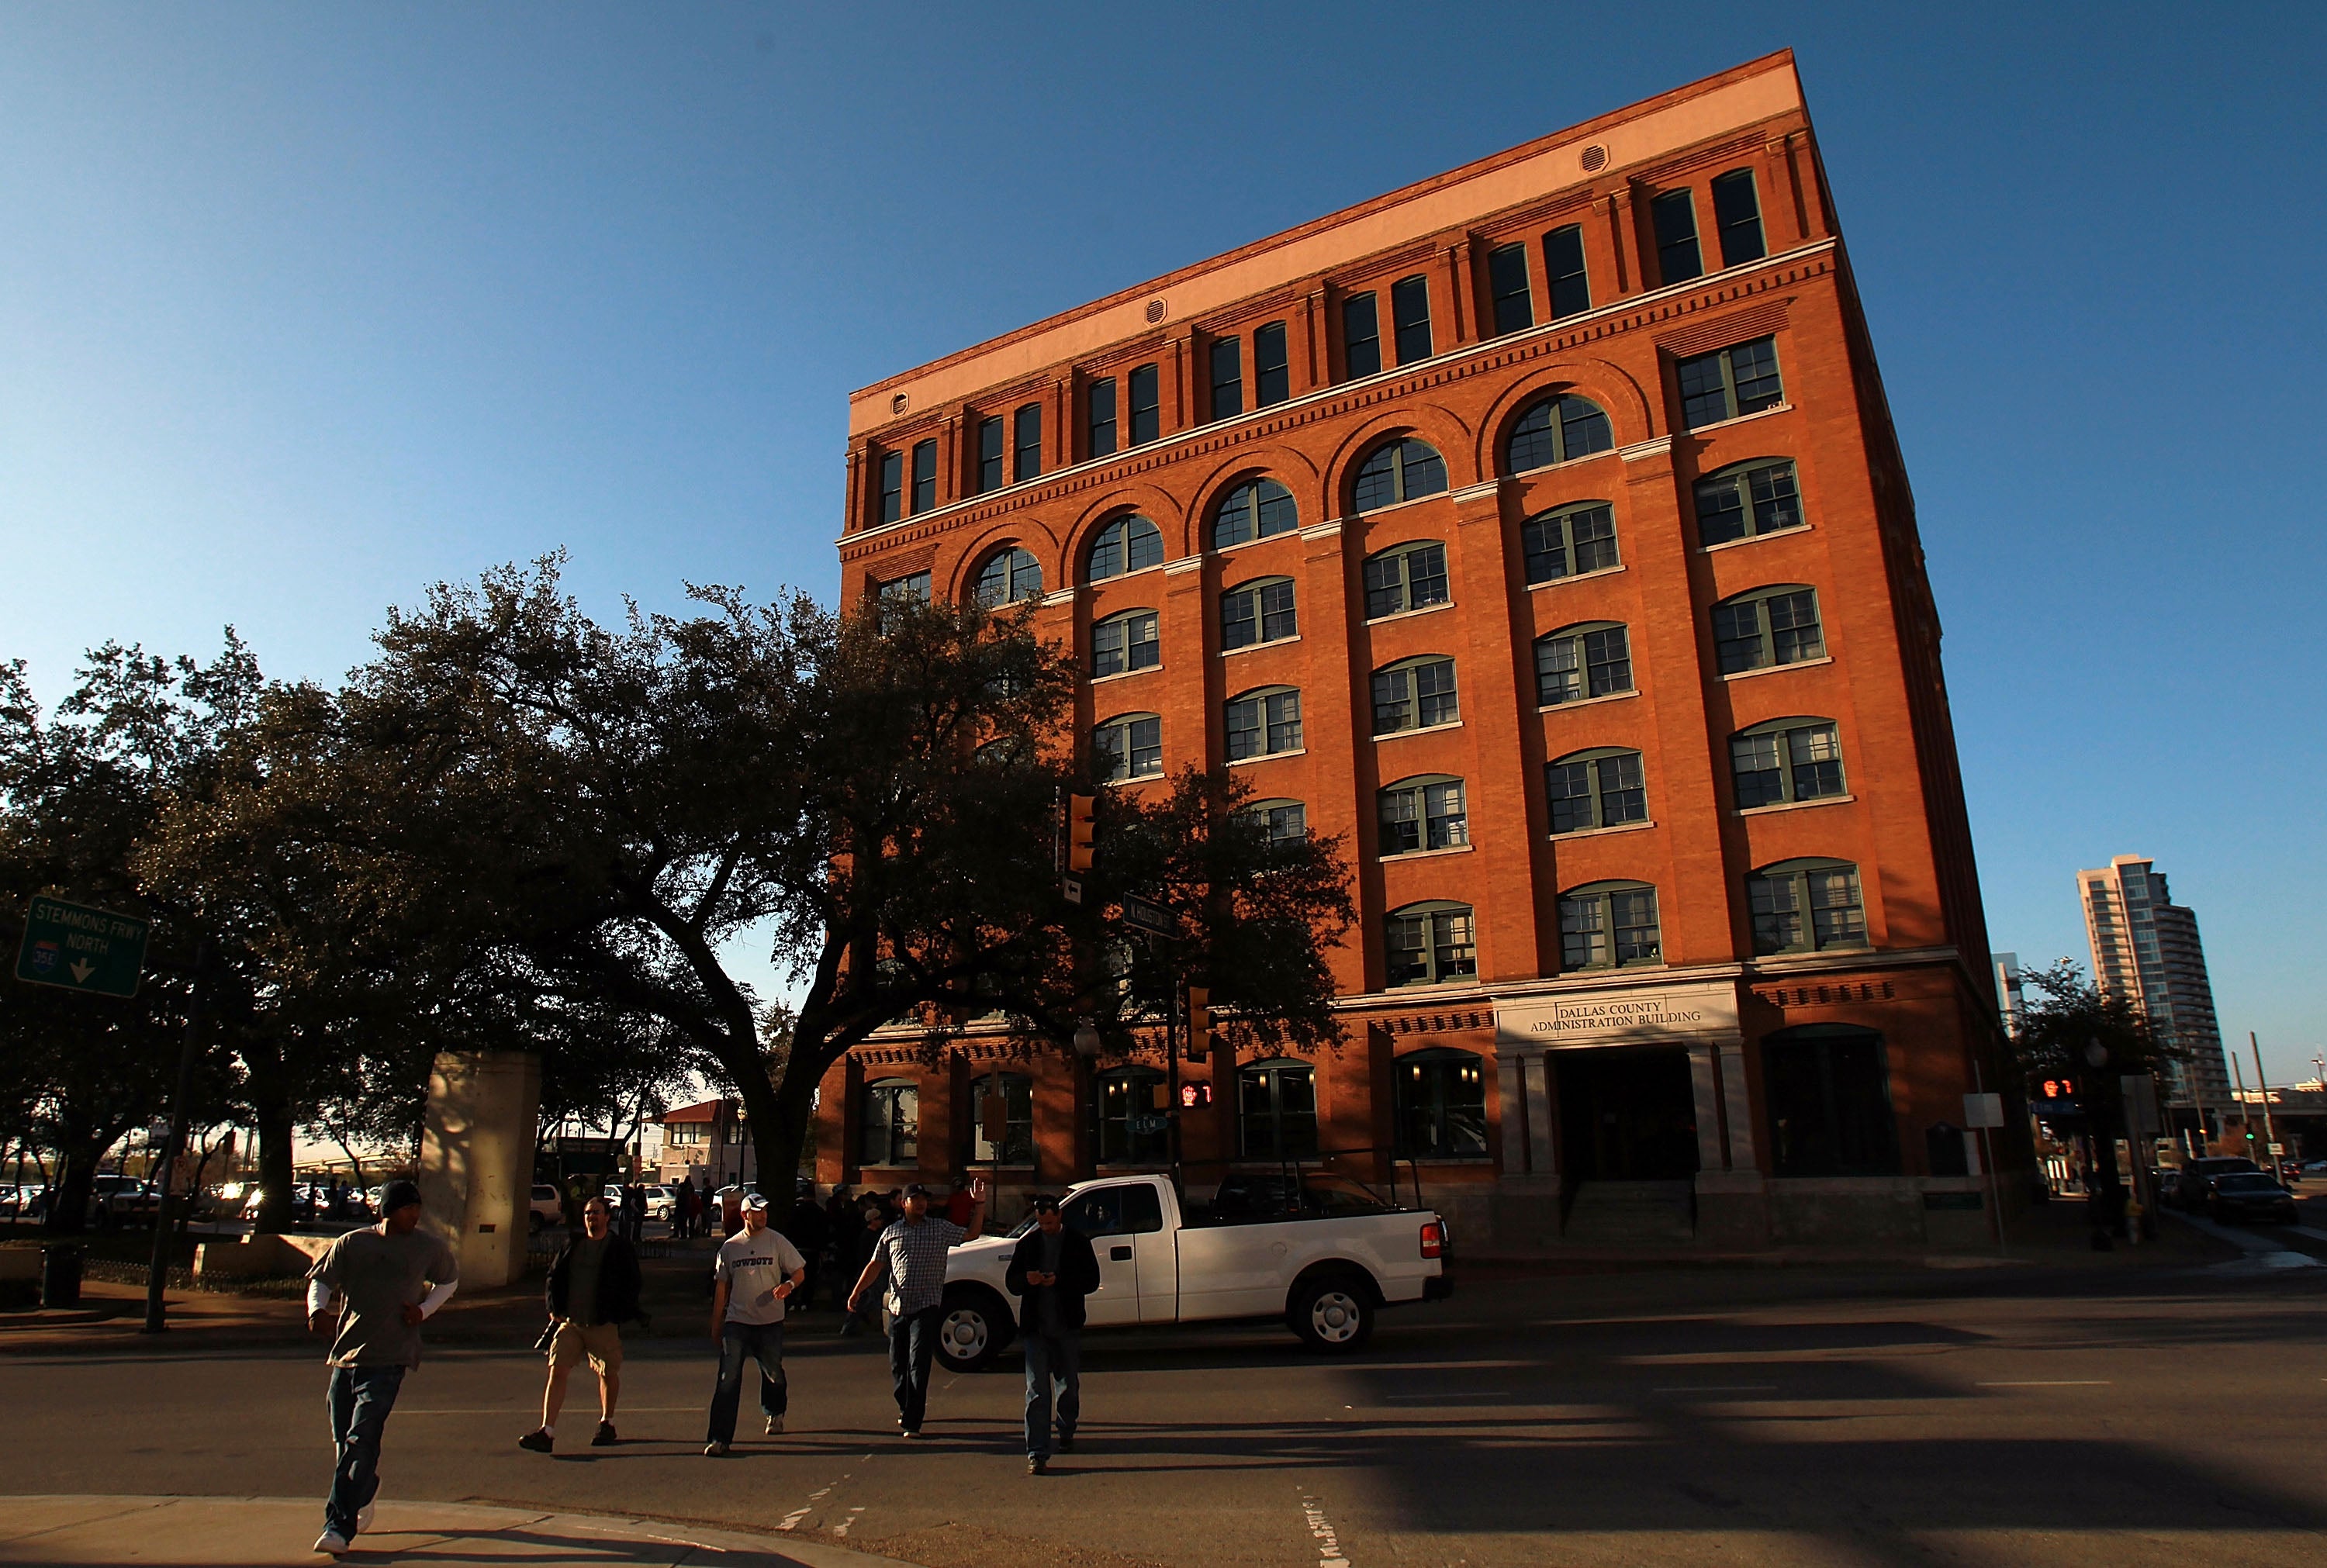 The former Texas School Book Depository, now the Dallas County Administration Building, from were Lee Harvey Oswald is believed to have fired the fatal shots